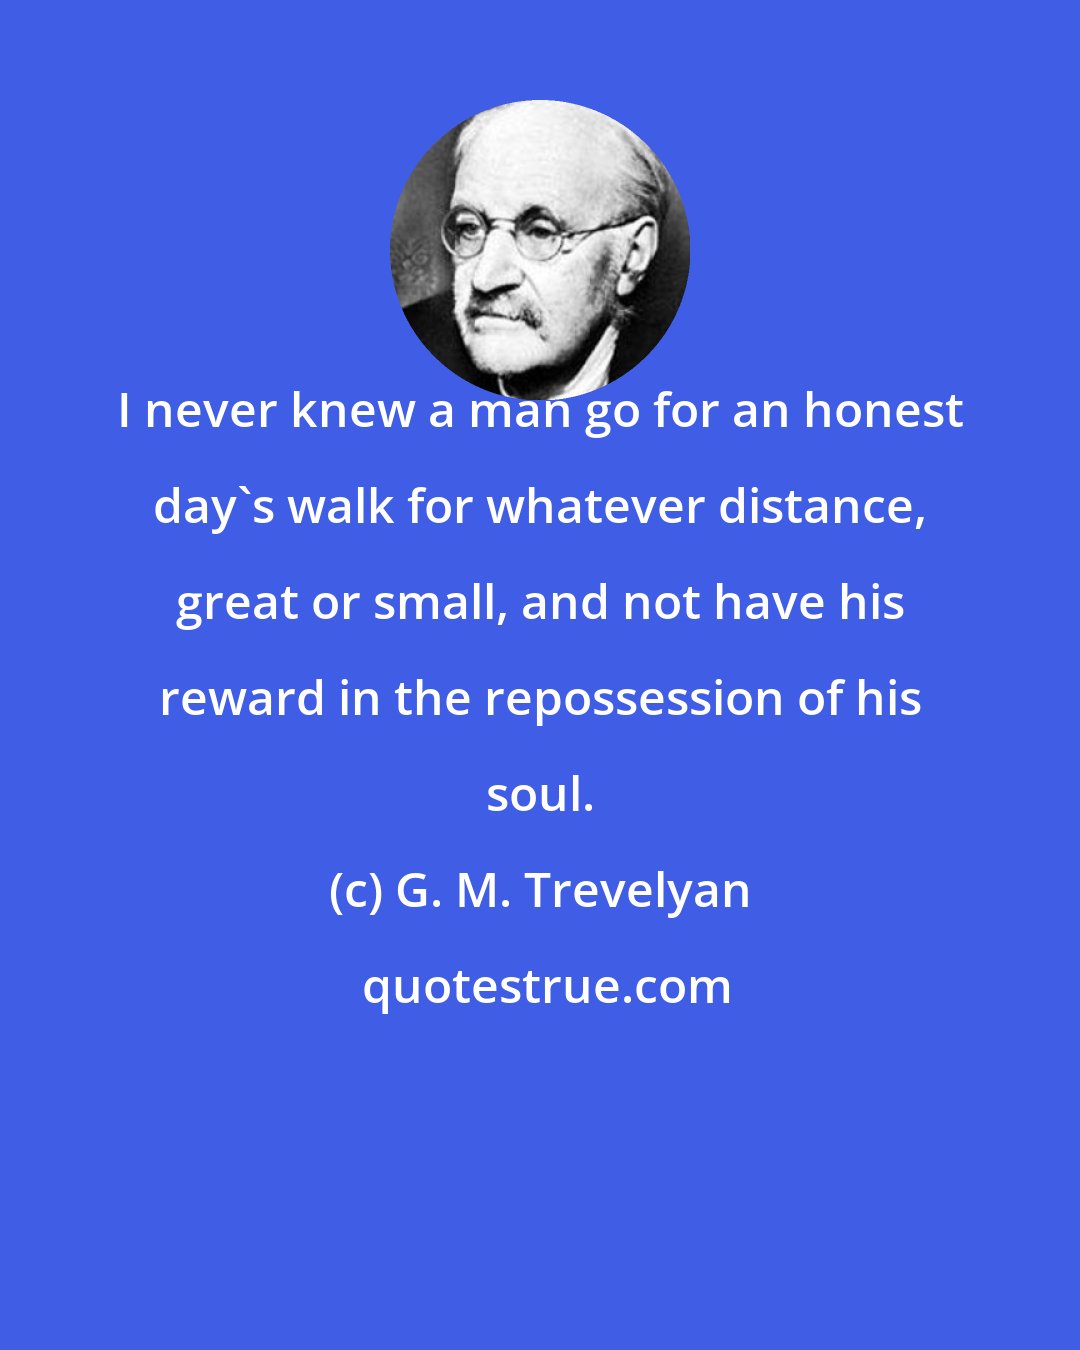 G. M. Trevelyan: I never knew a man go for an honest day's walk for whatever distance, great or small, and not have his reward in the repossession of his soul.